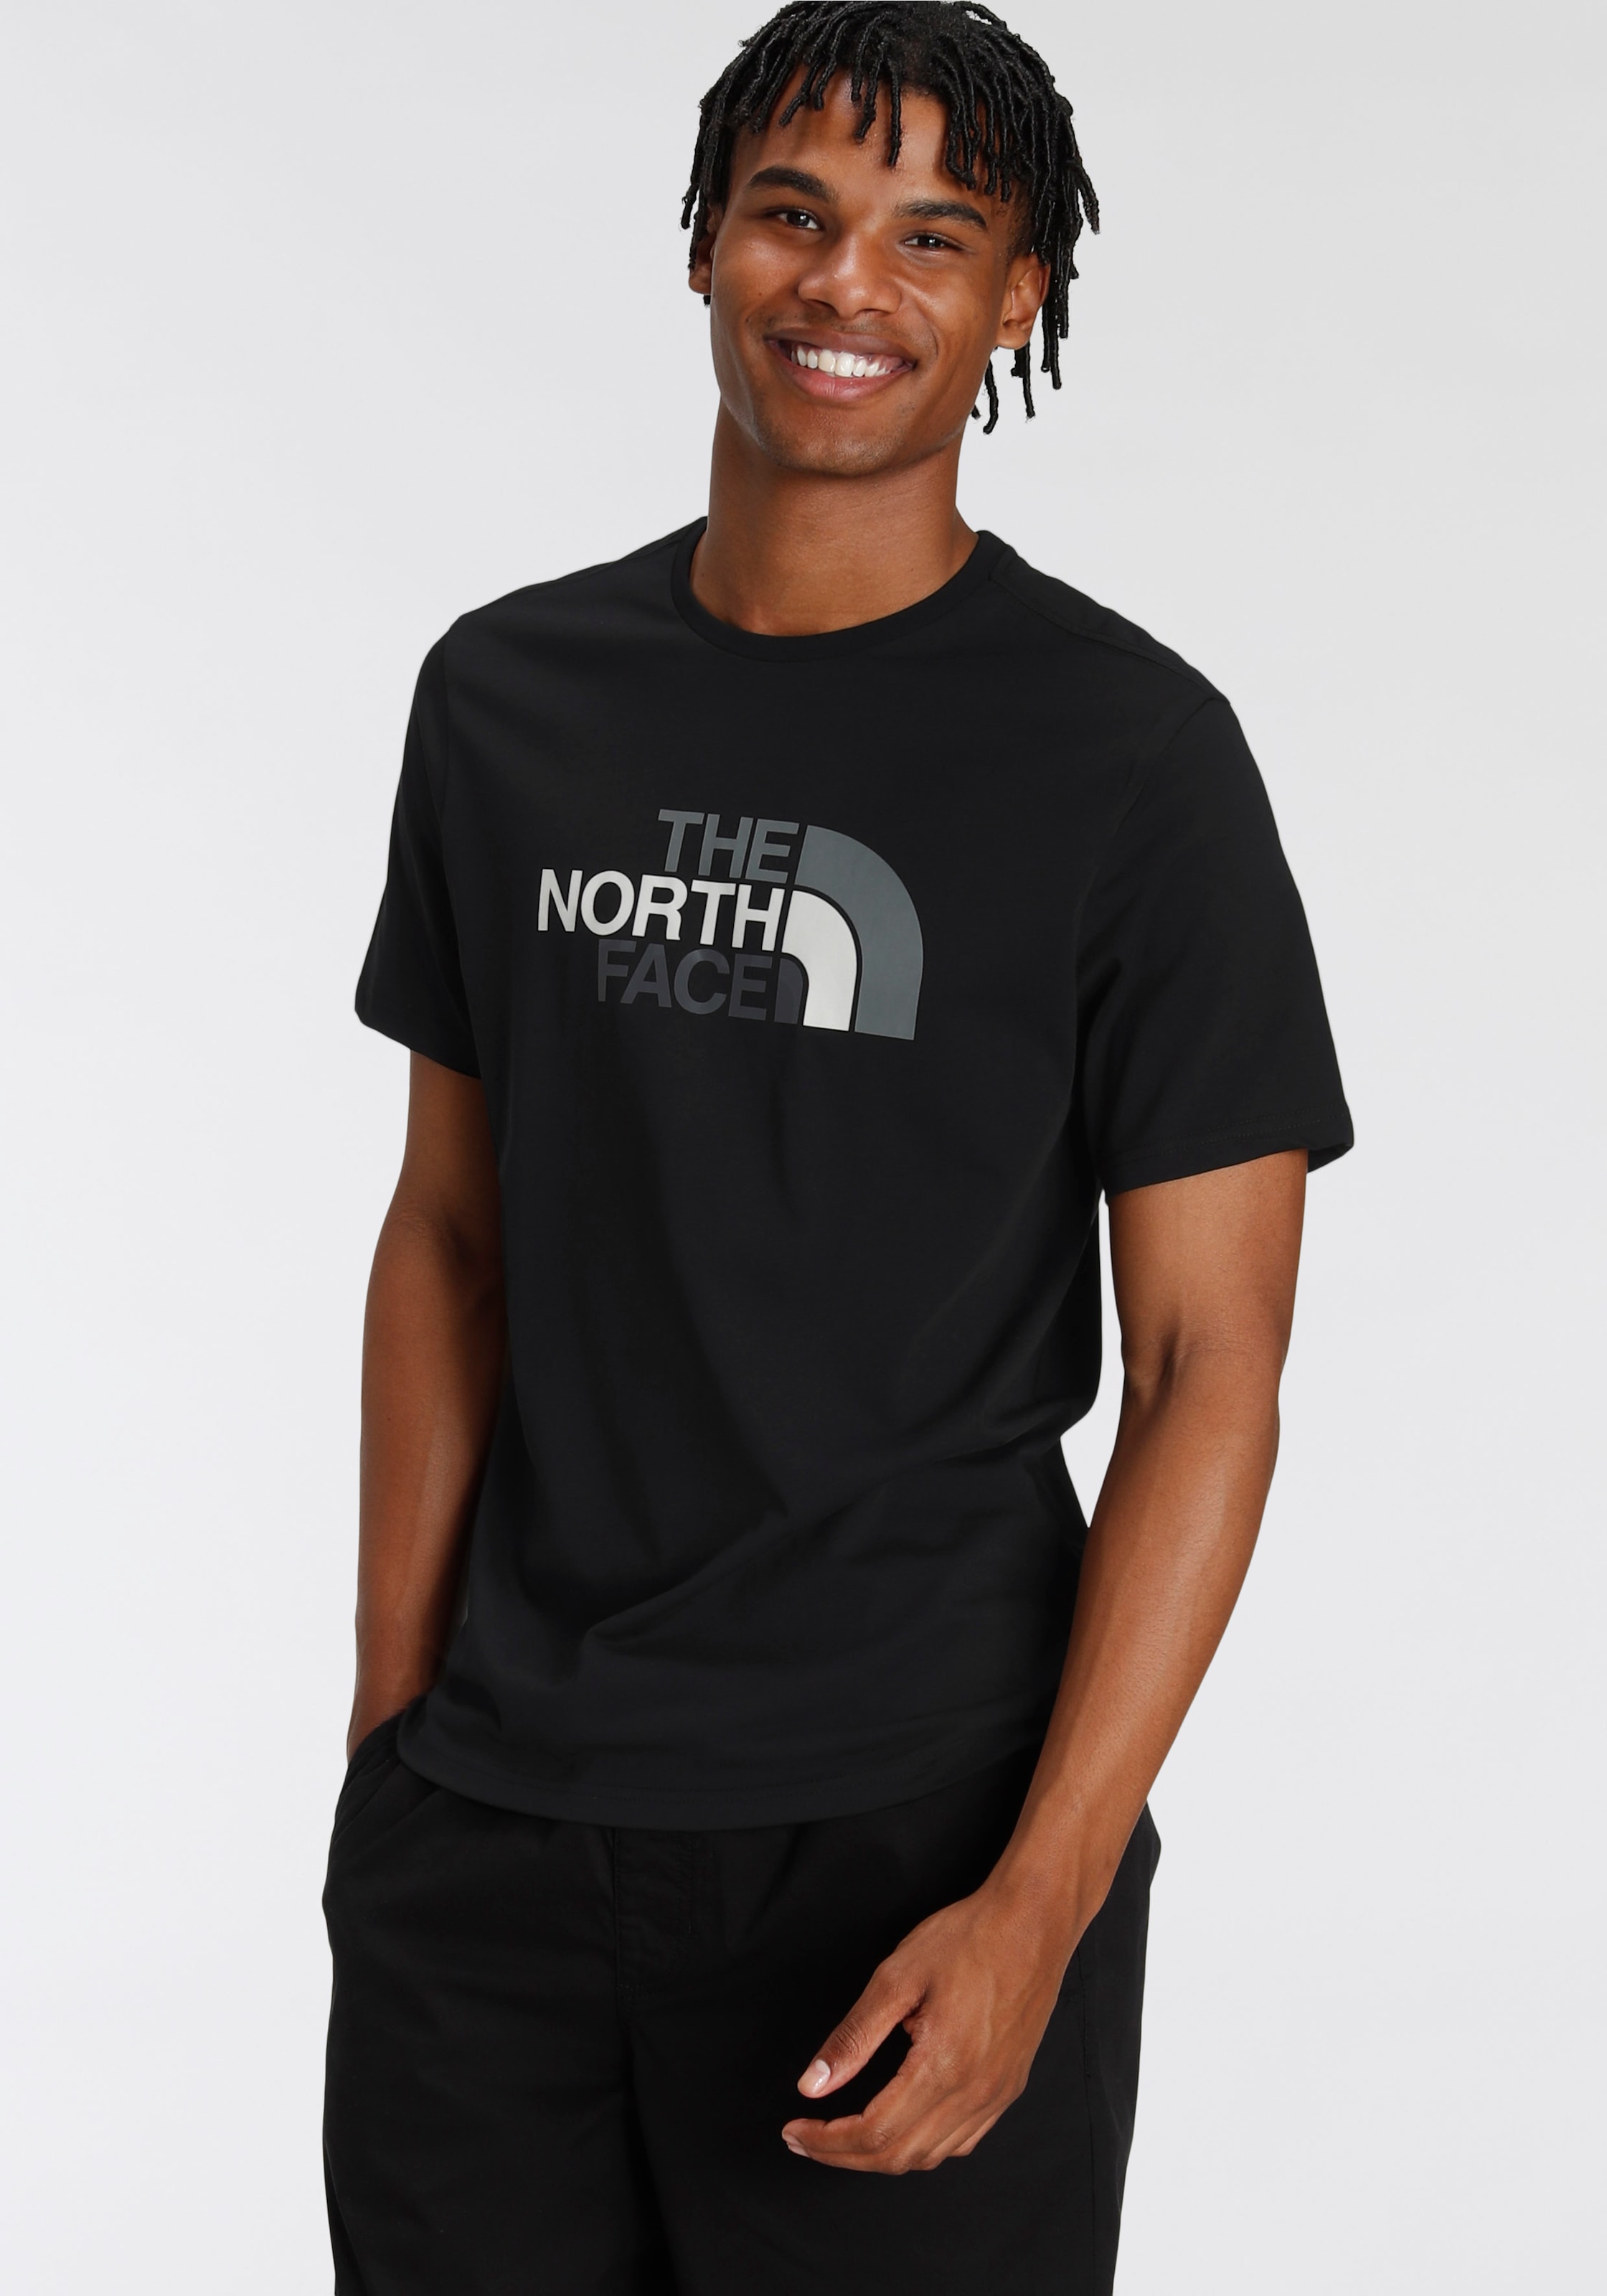 T-Shirt Face bei The online »EASY Großer North OTTO TEE«, kaufen Logo-Print